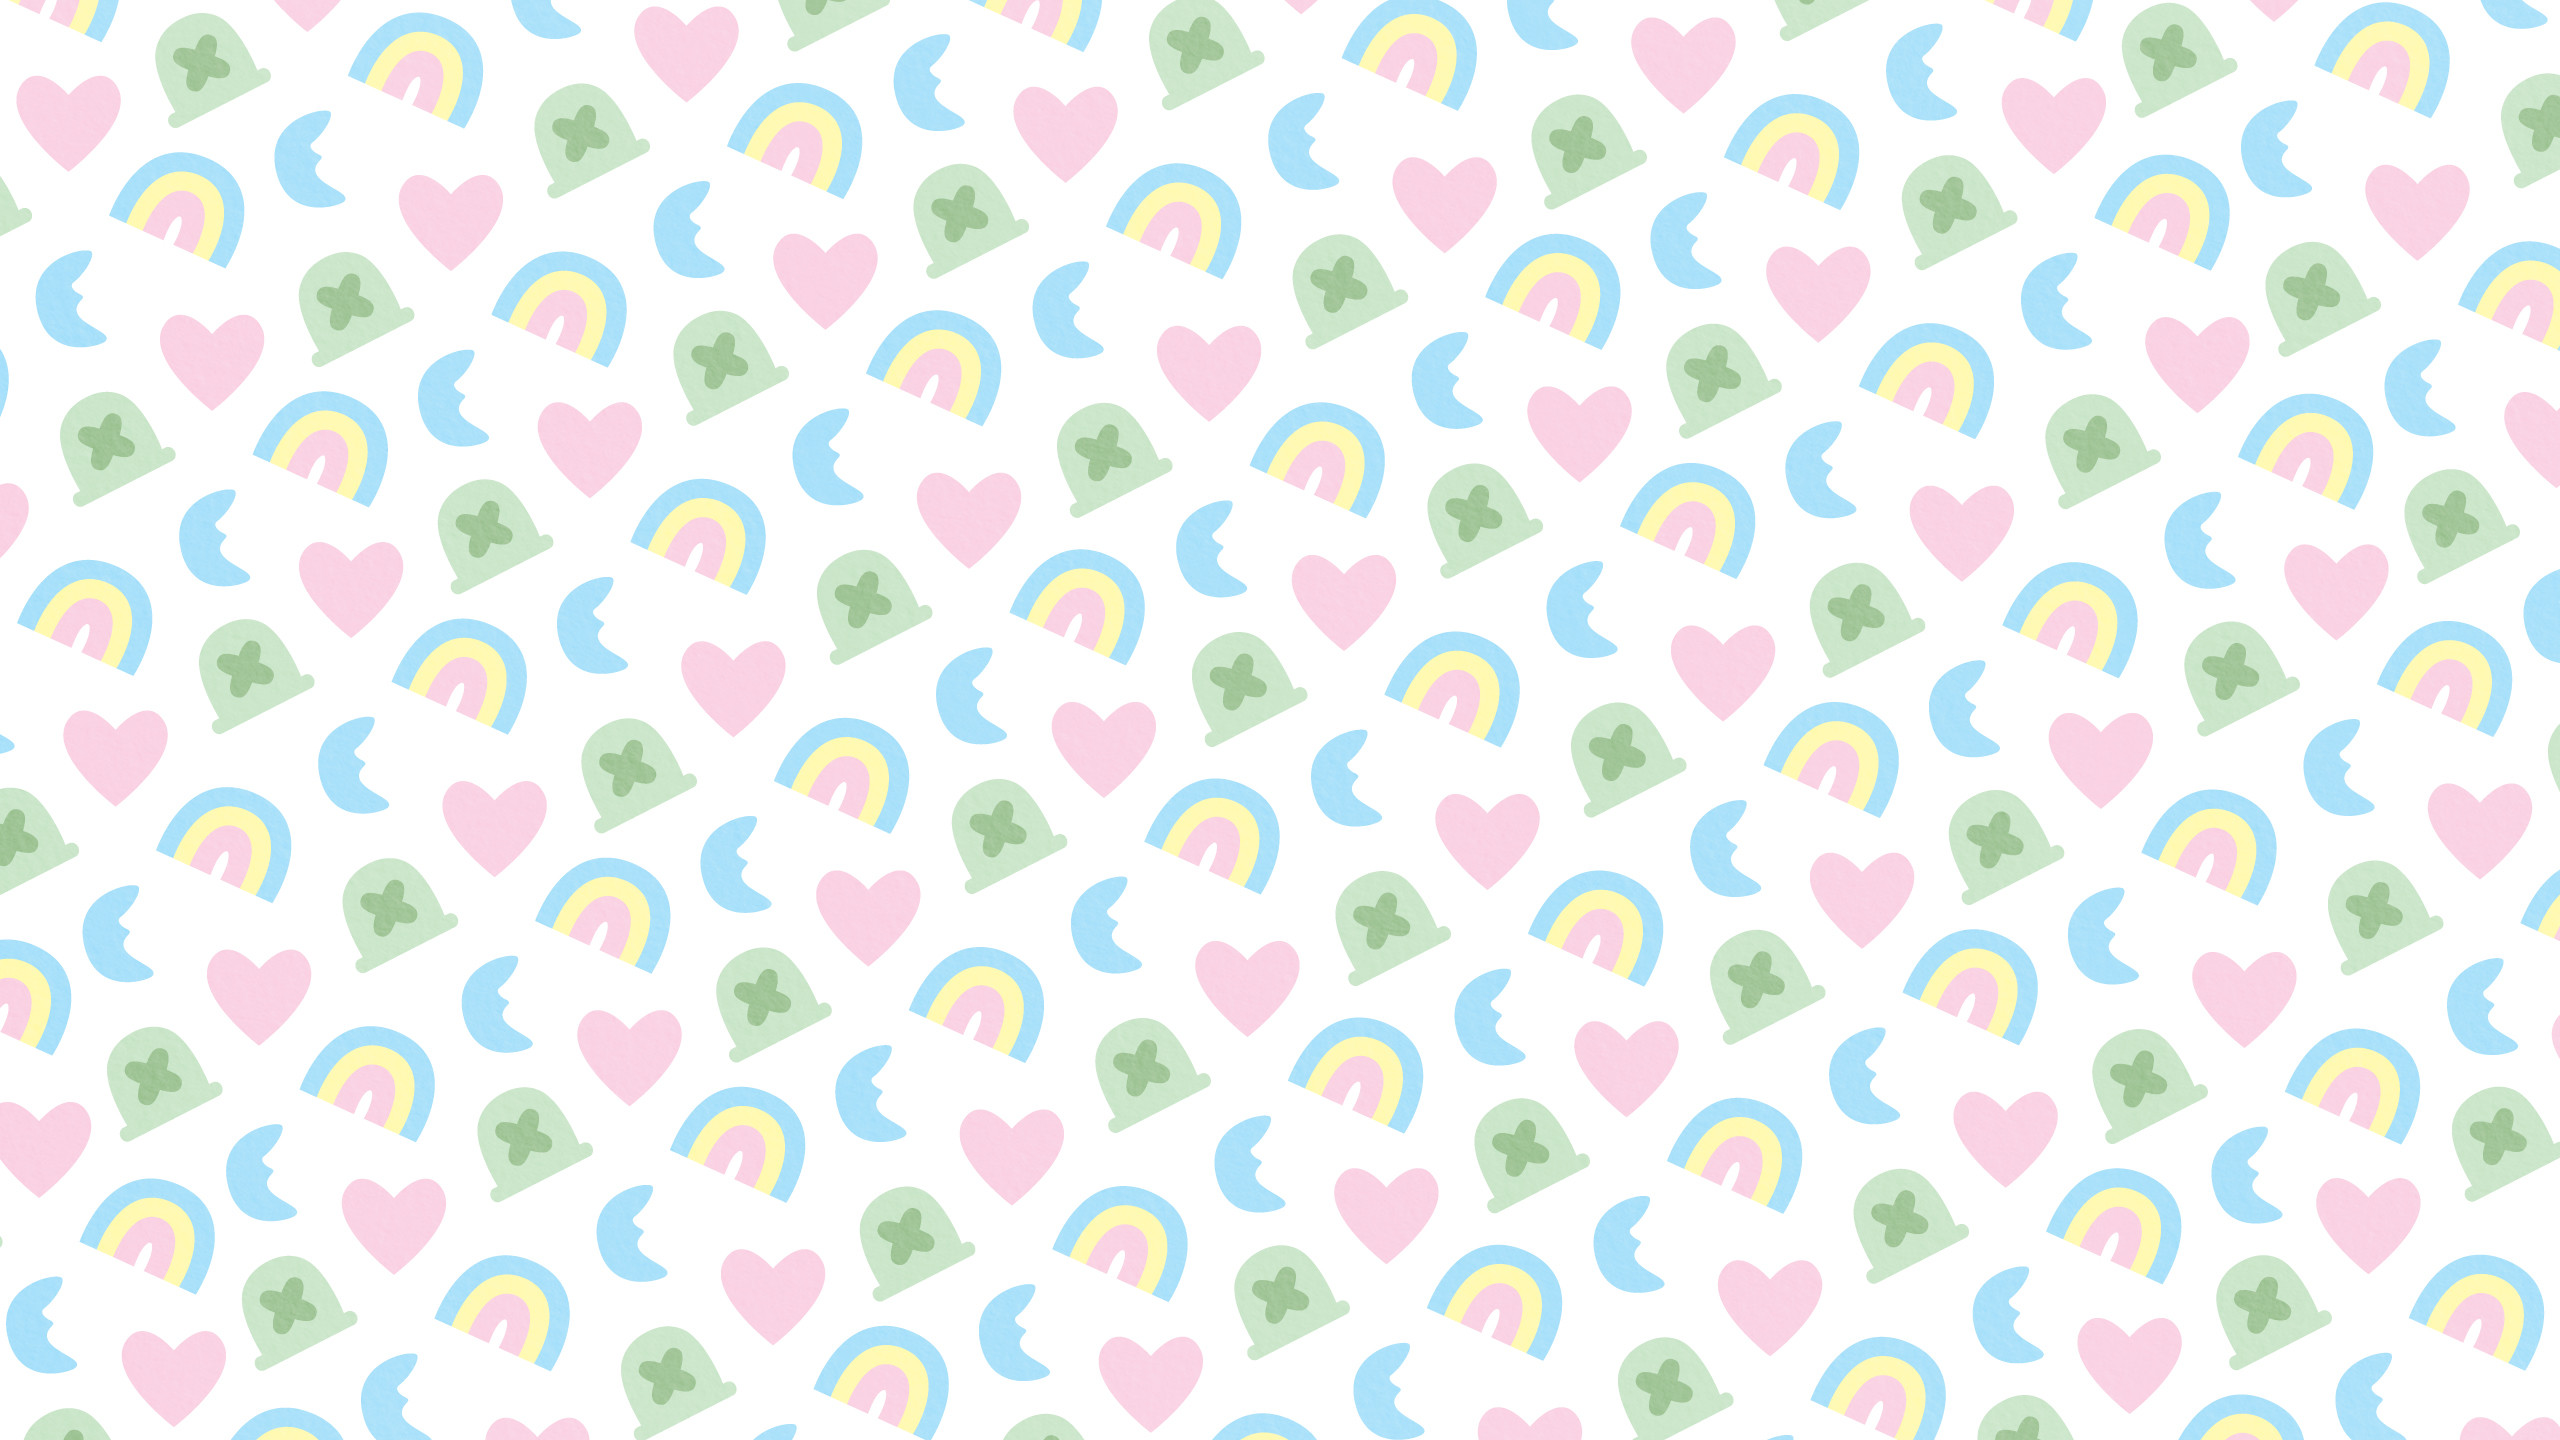 2560x1440 ... Lucky Charms Live Wallpaper - Android Apps on Google Play ...